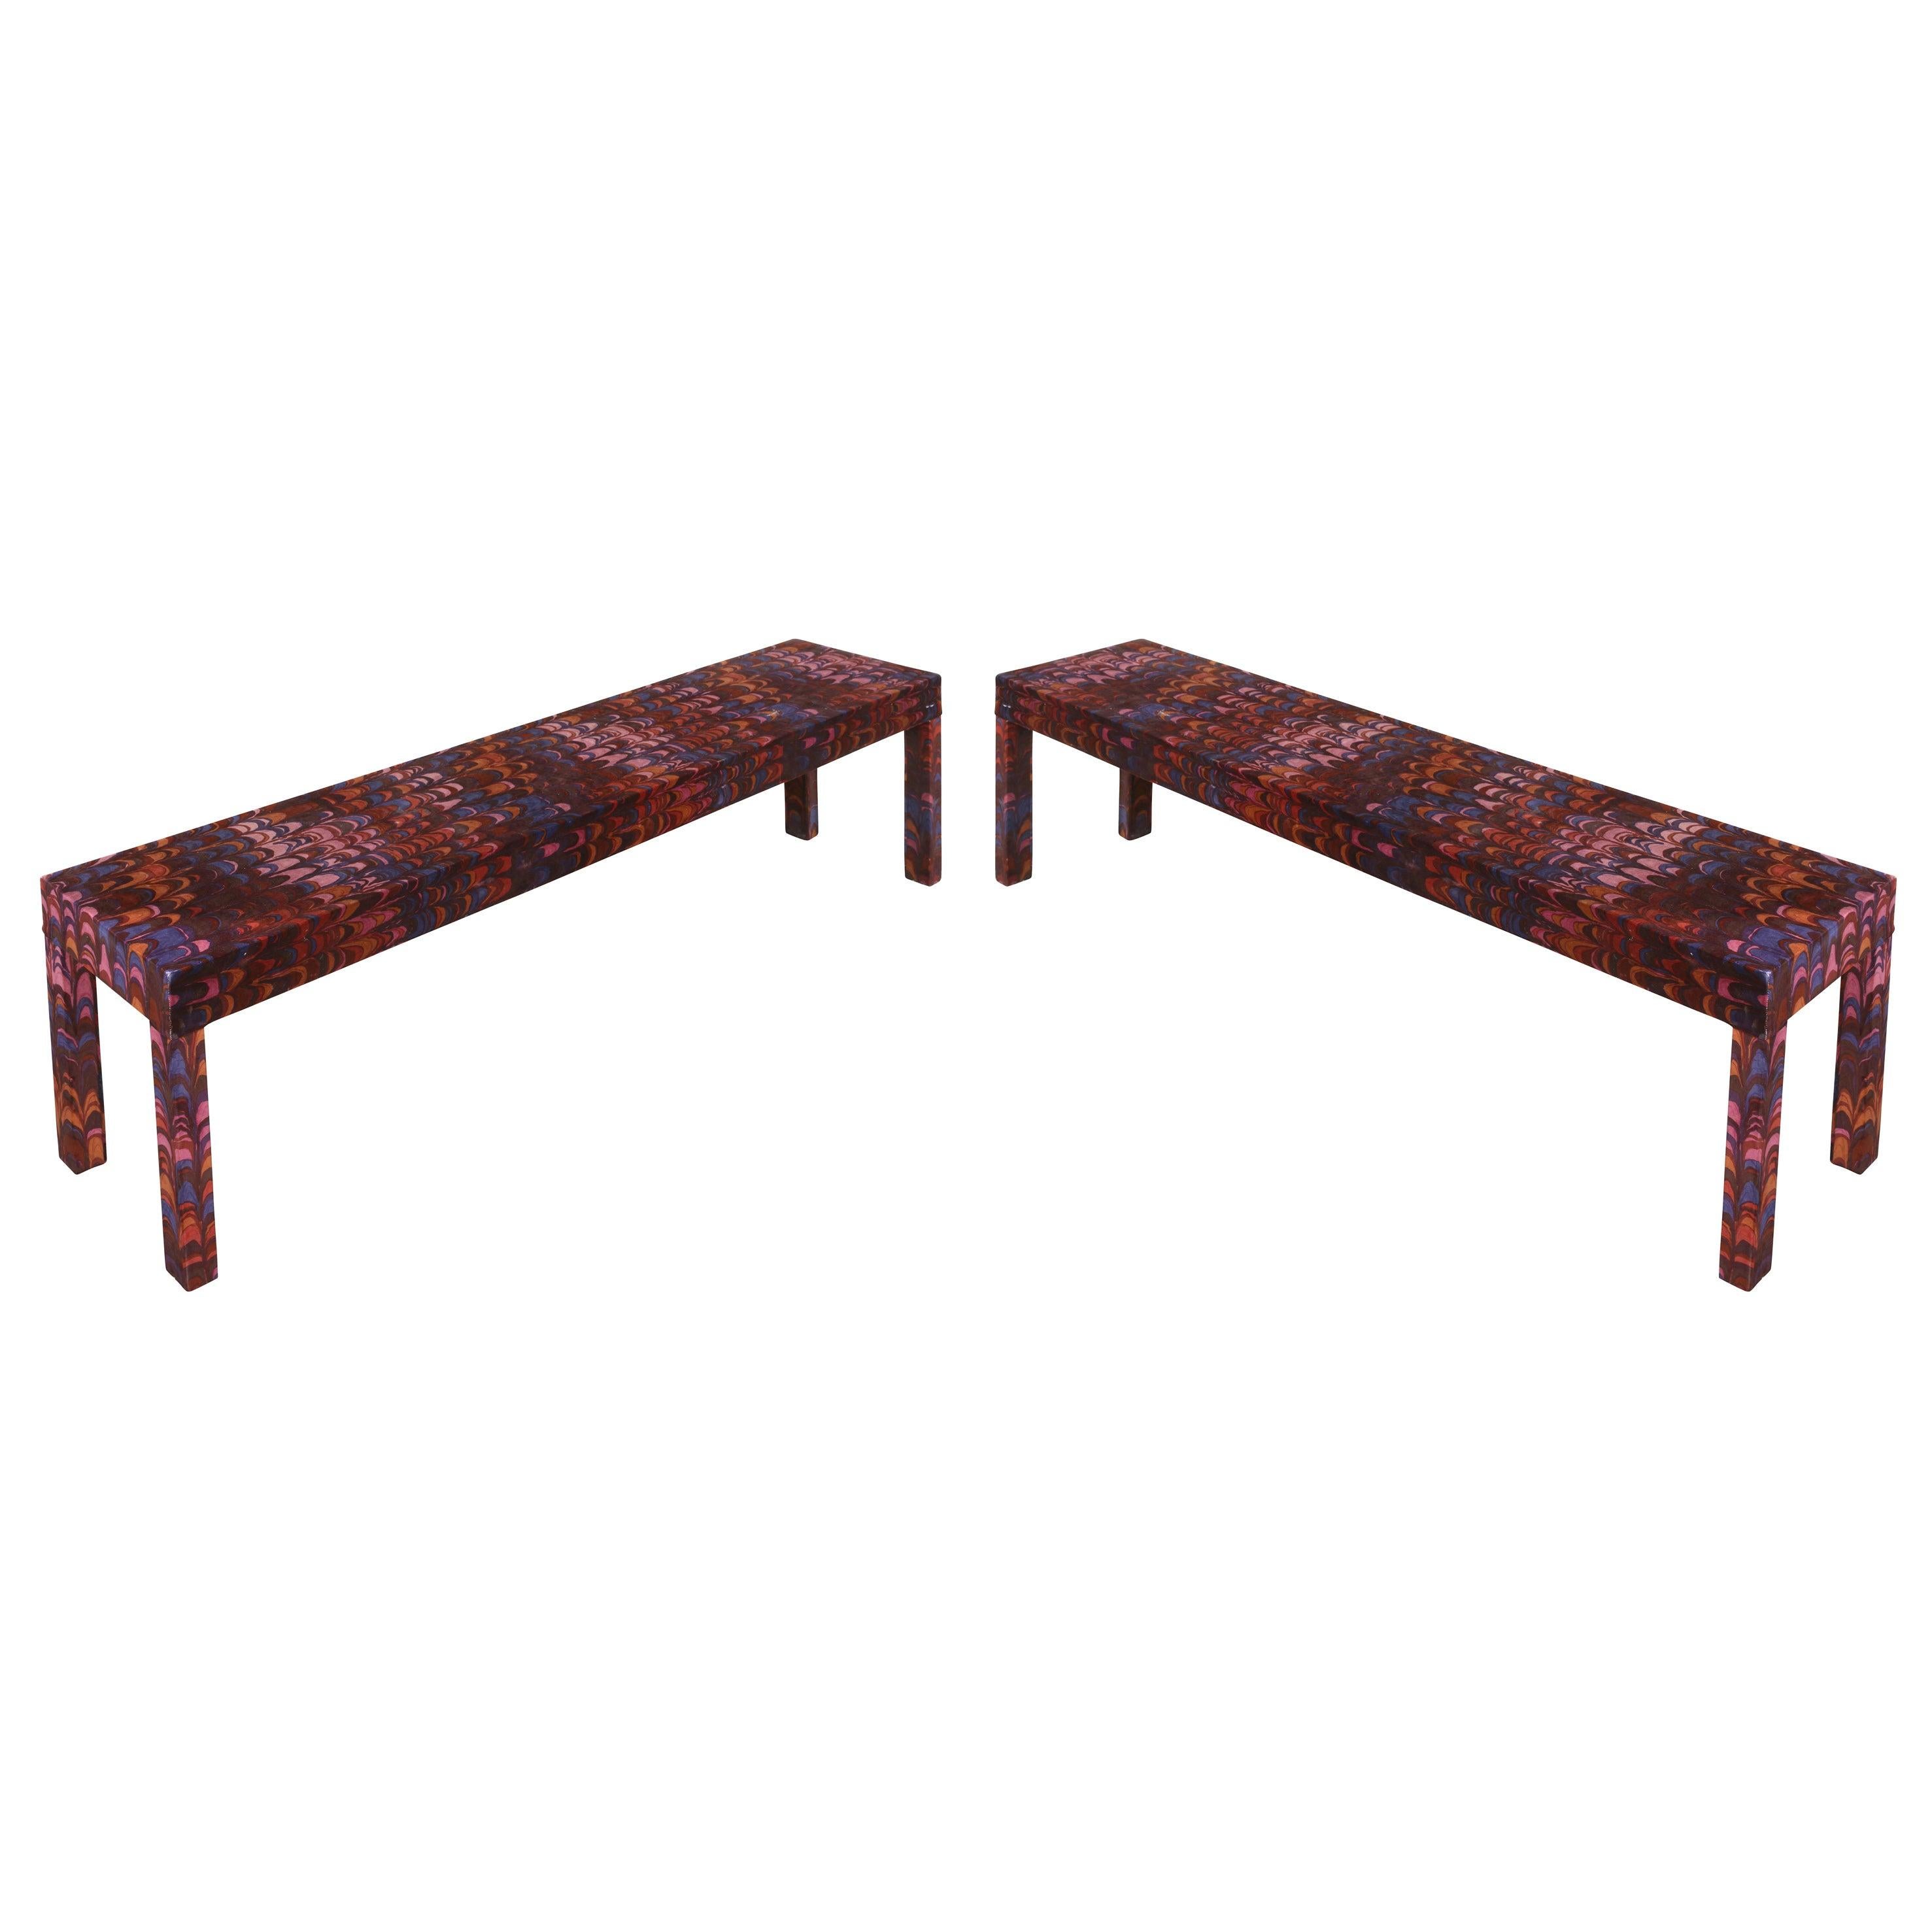 Pair of Mid-Century Modern Vintage Parsons Style Benches